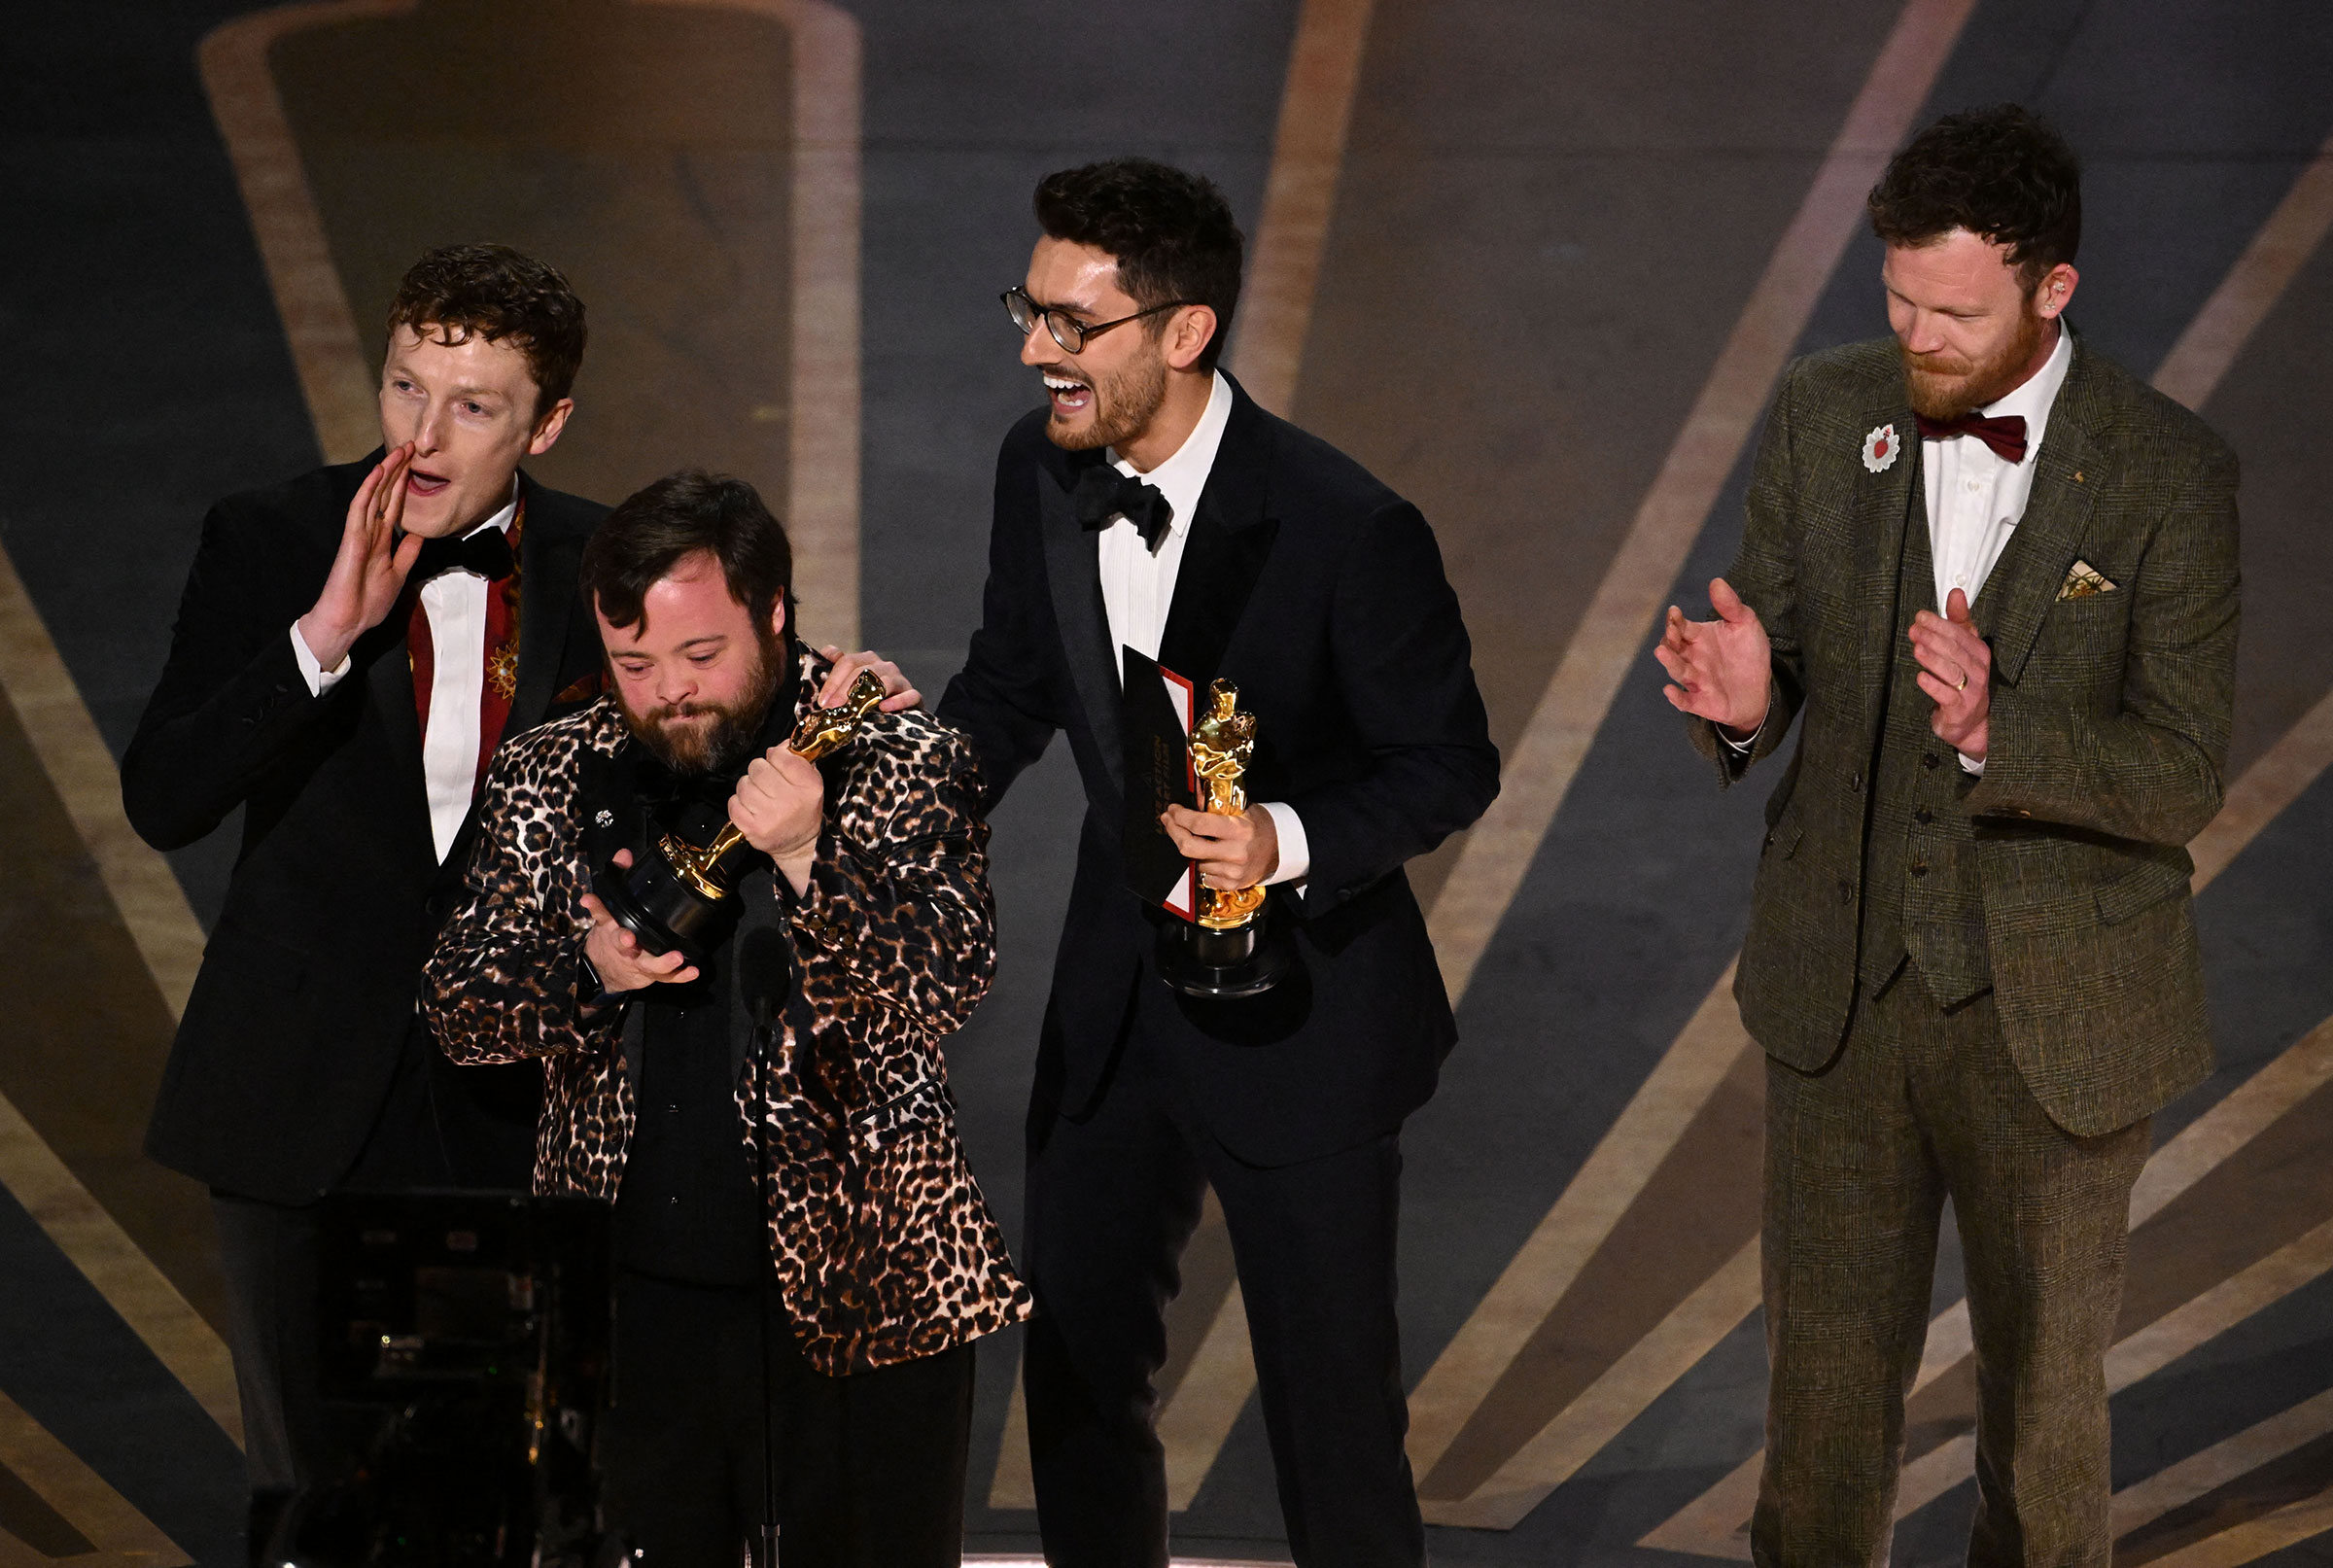 Ross White, James Martin , Tom Berkeley and Seamus O'Hara accept the Oscar for Best Live Action Short Film for 